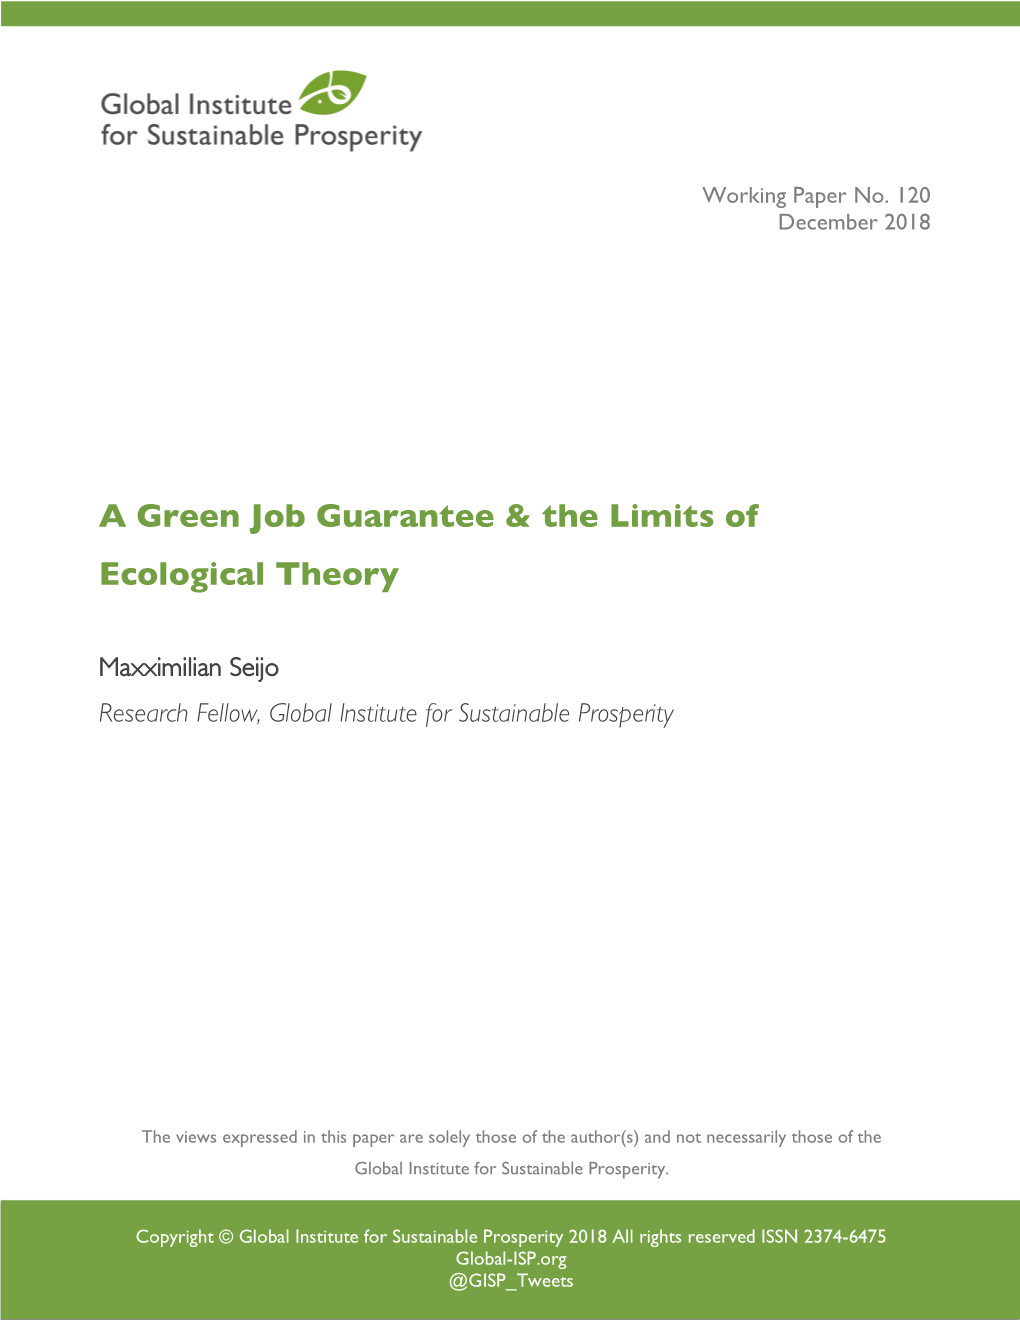 A Green Job Guarantee & the Limits of Ecological Theory